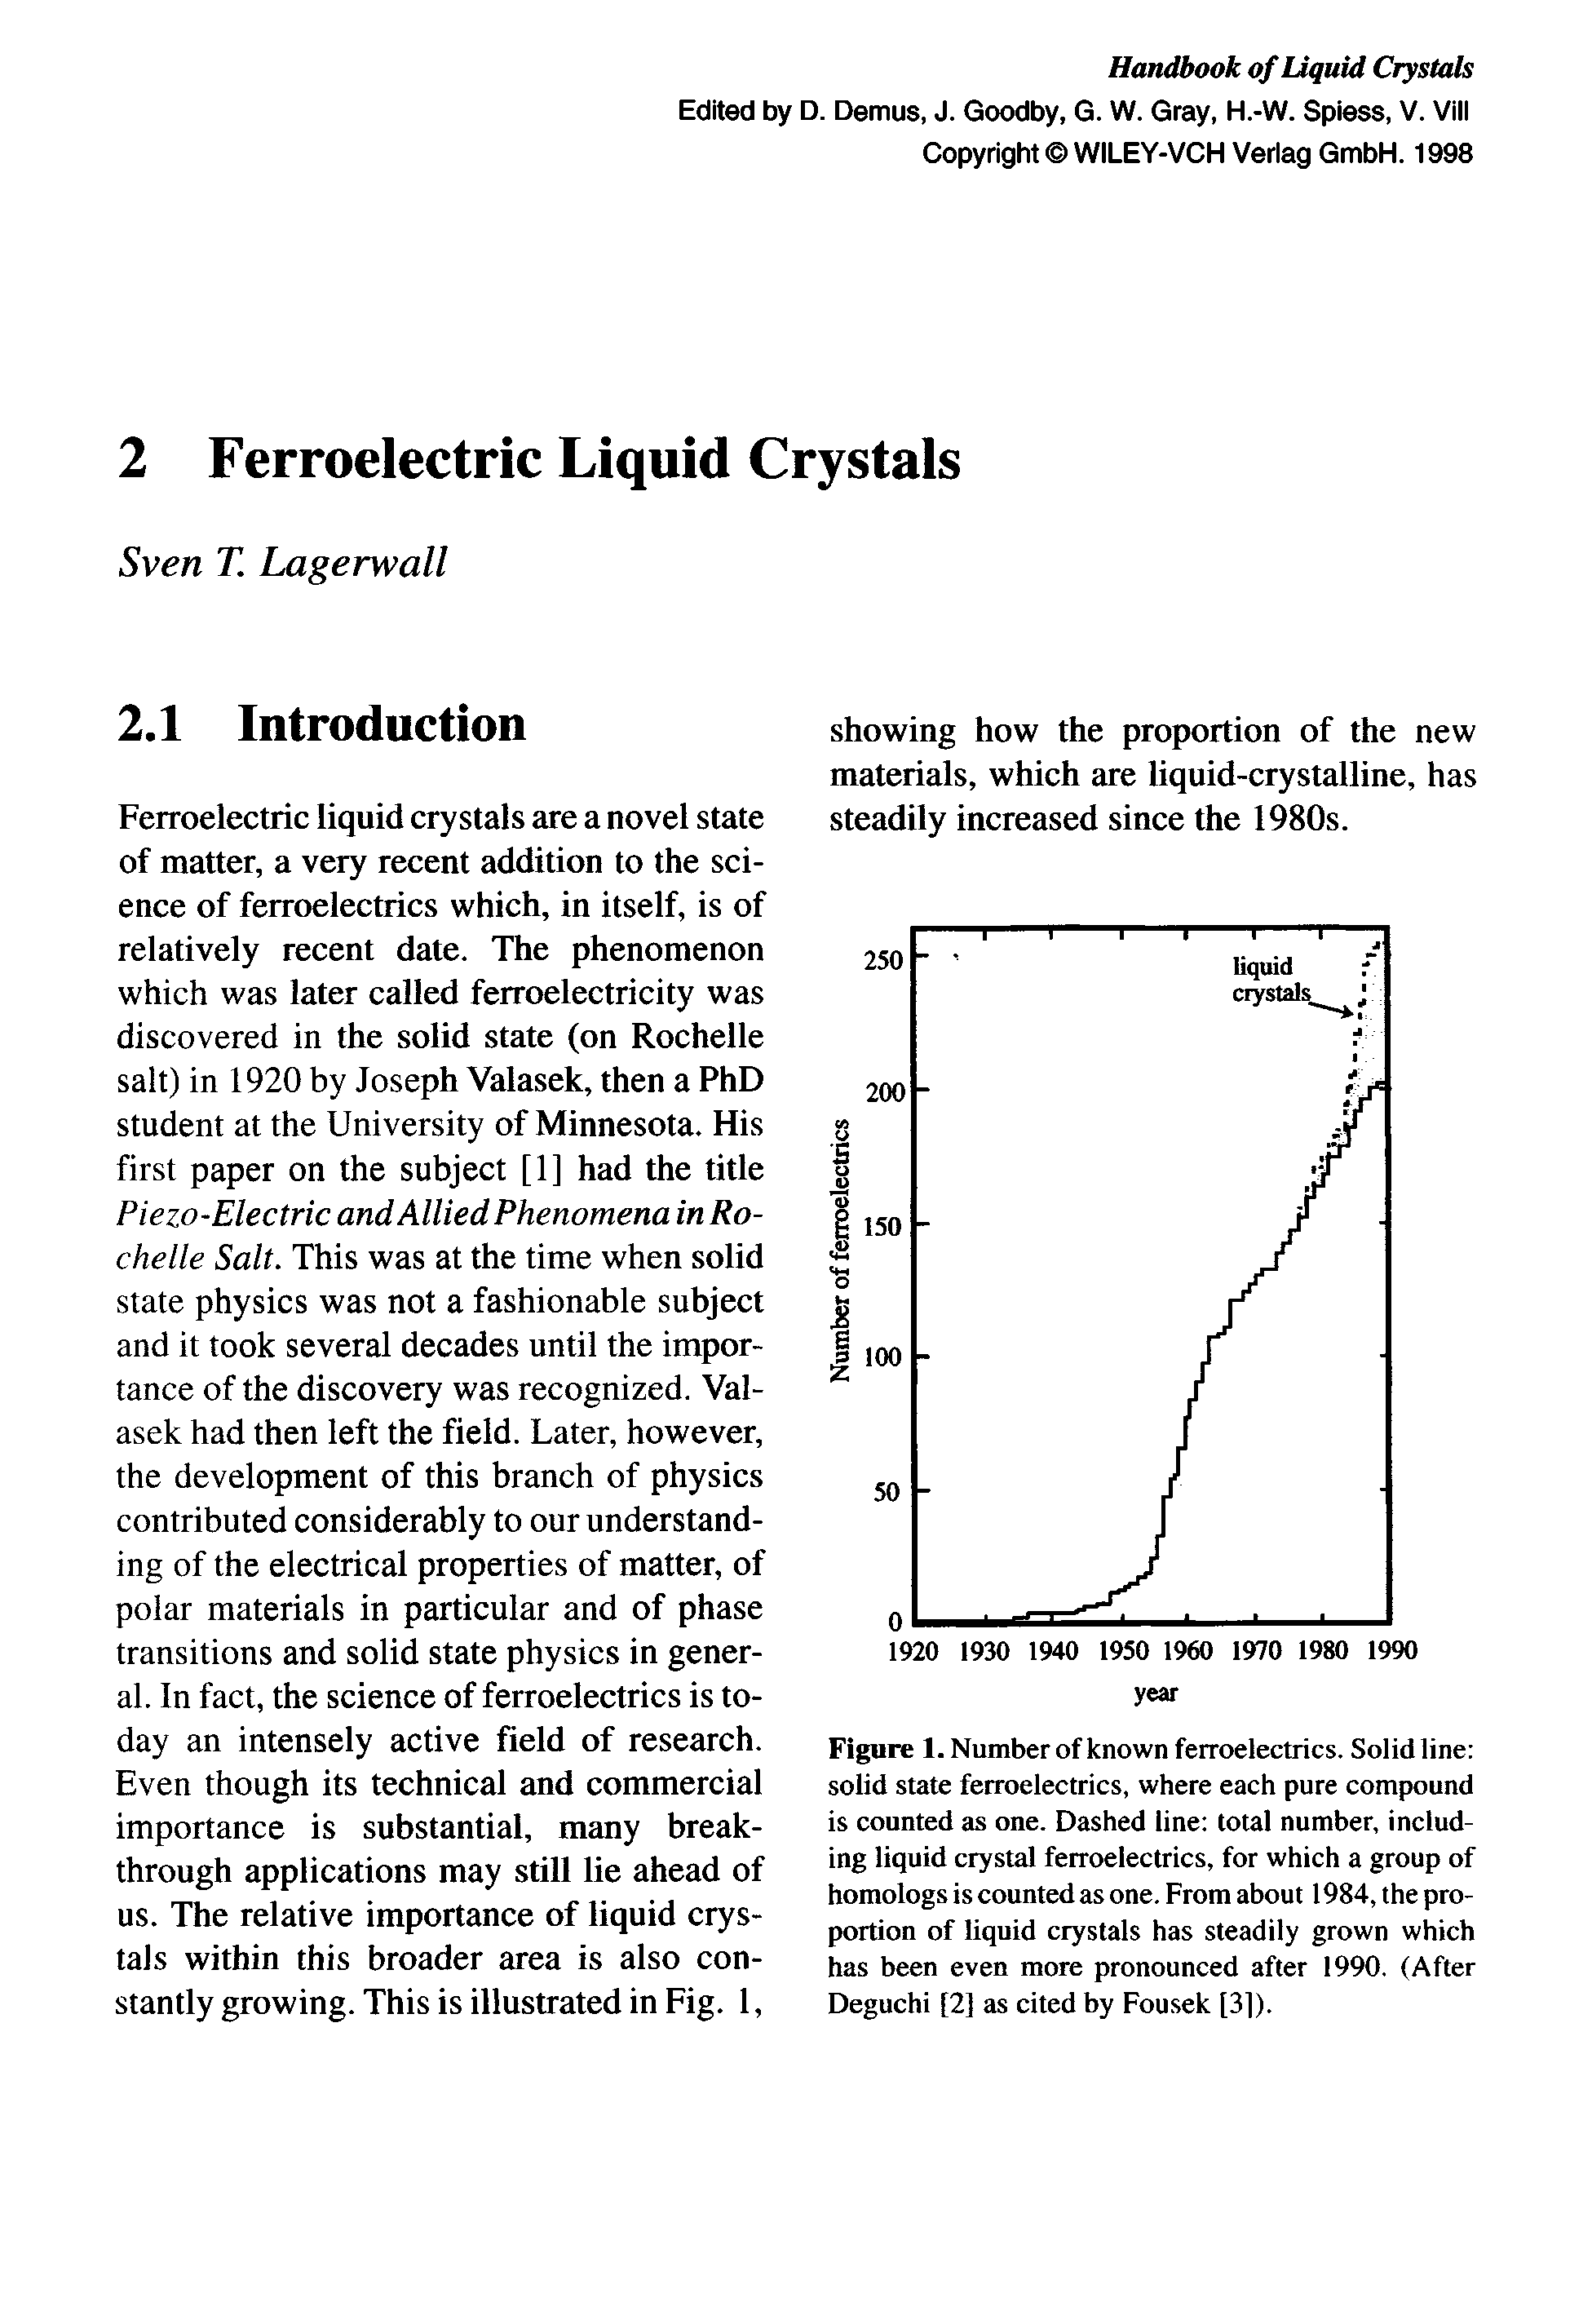 Figure 1. Number of known ferroelectrics. Solid line solid state ferroelectrics, where each pure compound is counted as one. Dashed line total number, including liquid crystal ferroelectrics, for which a group of homologs is counted as one. From about 1984, the proportion of liquid crystals has steadily grown which has been even more pronounced after 1990. (After Deguchi [2] as cited by Fousek [31).